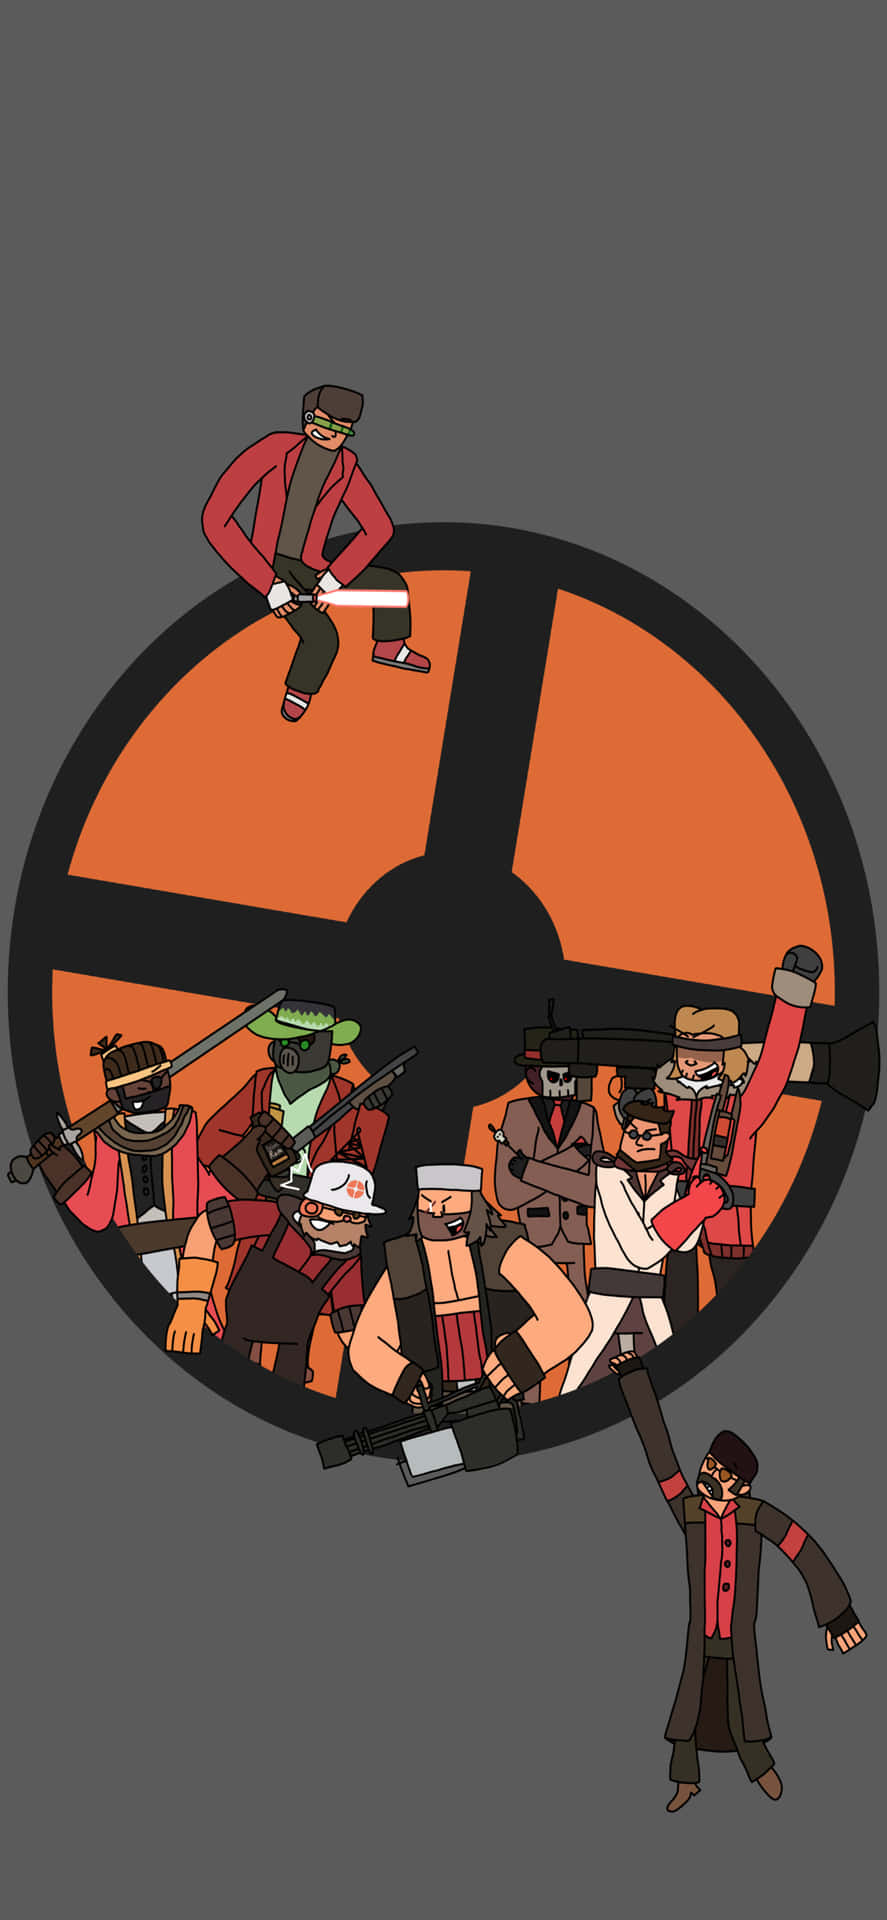 Iphone Xs Tf2 Background Kiddie Fanart Drawing Of The Characters